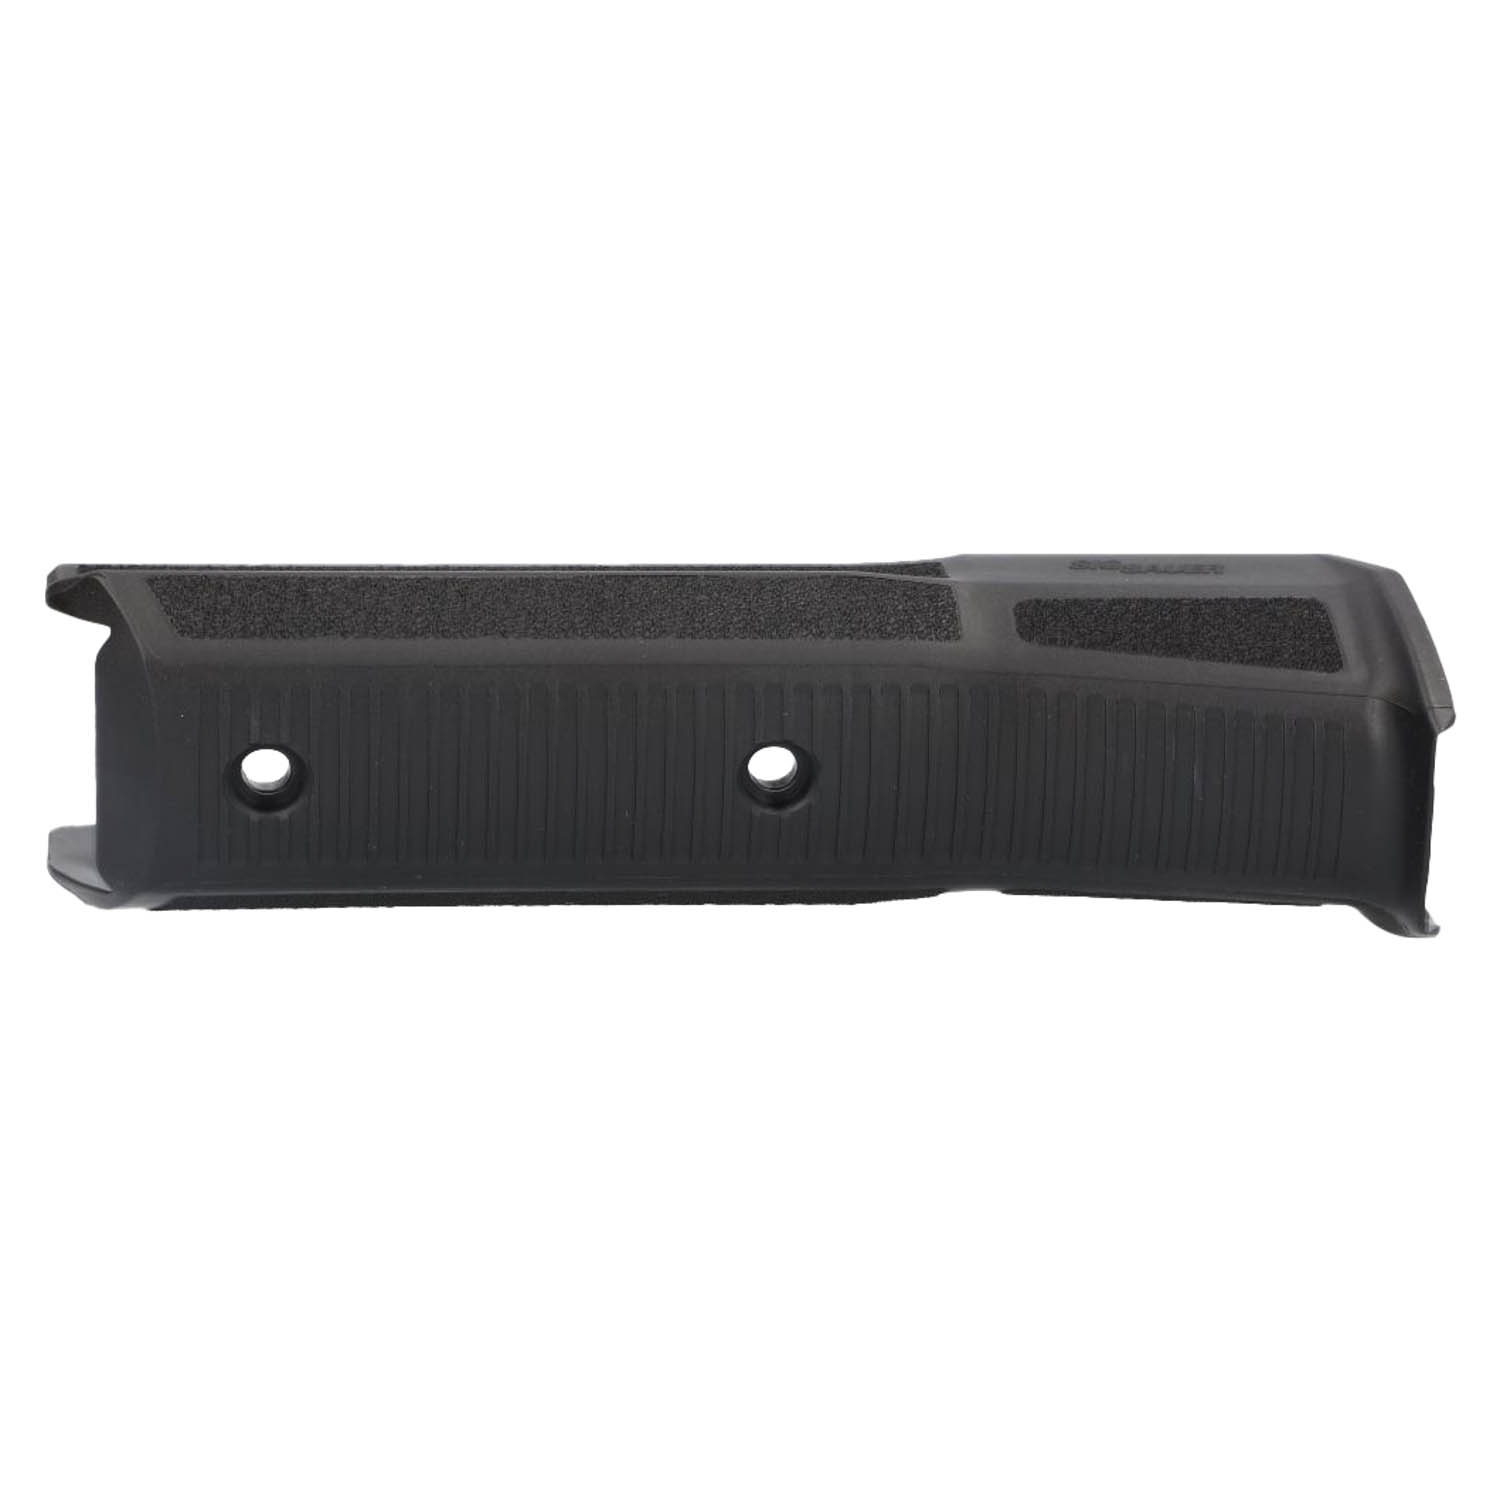 Sig Sauer Cross Rifle Forend Grip, 7.5: MGW